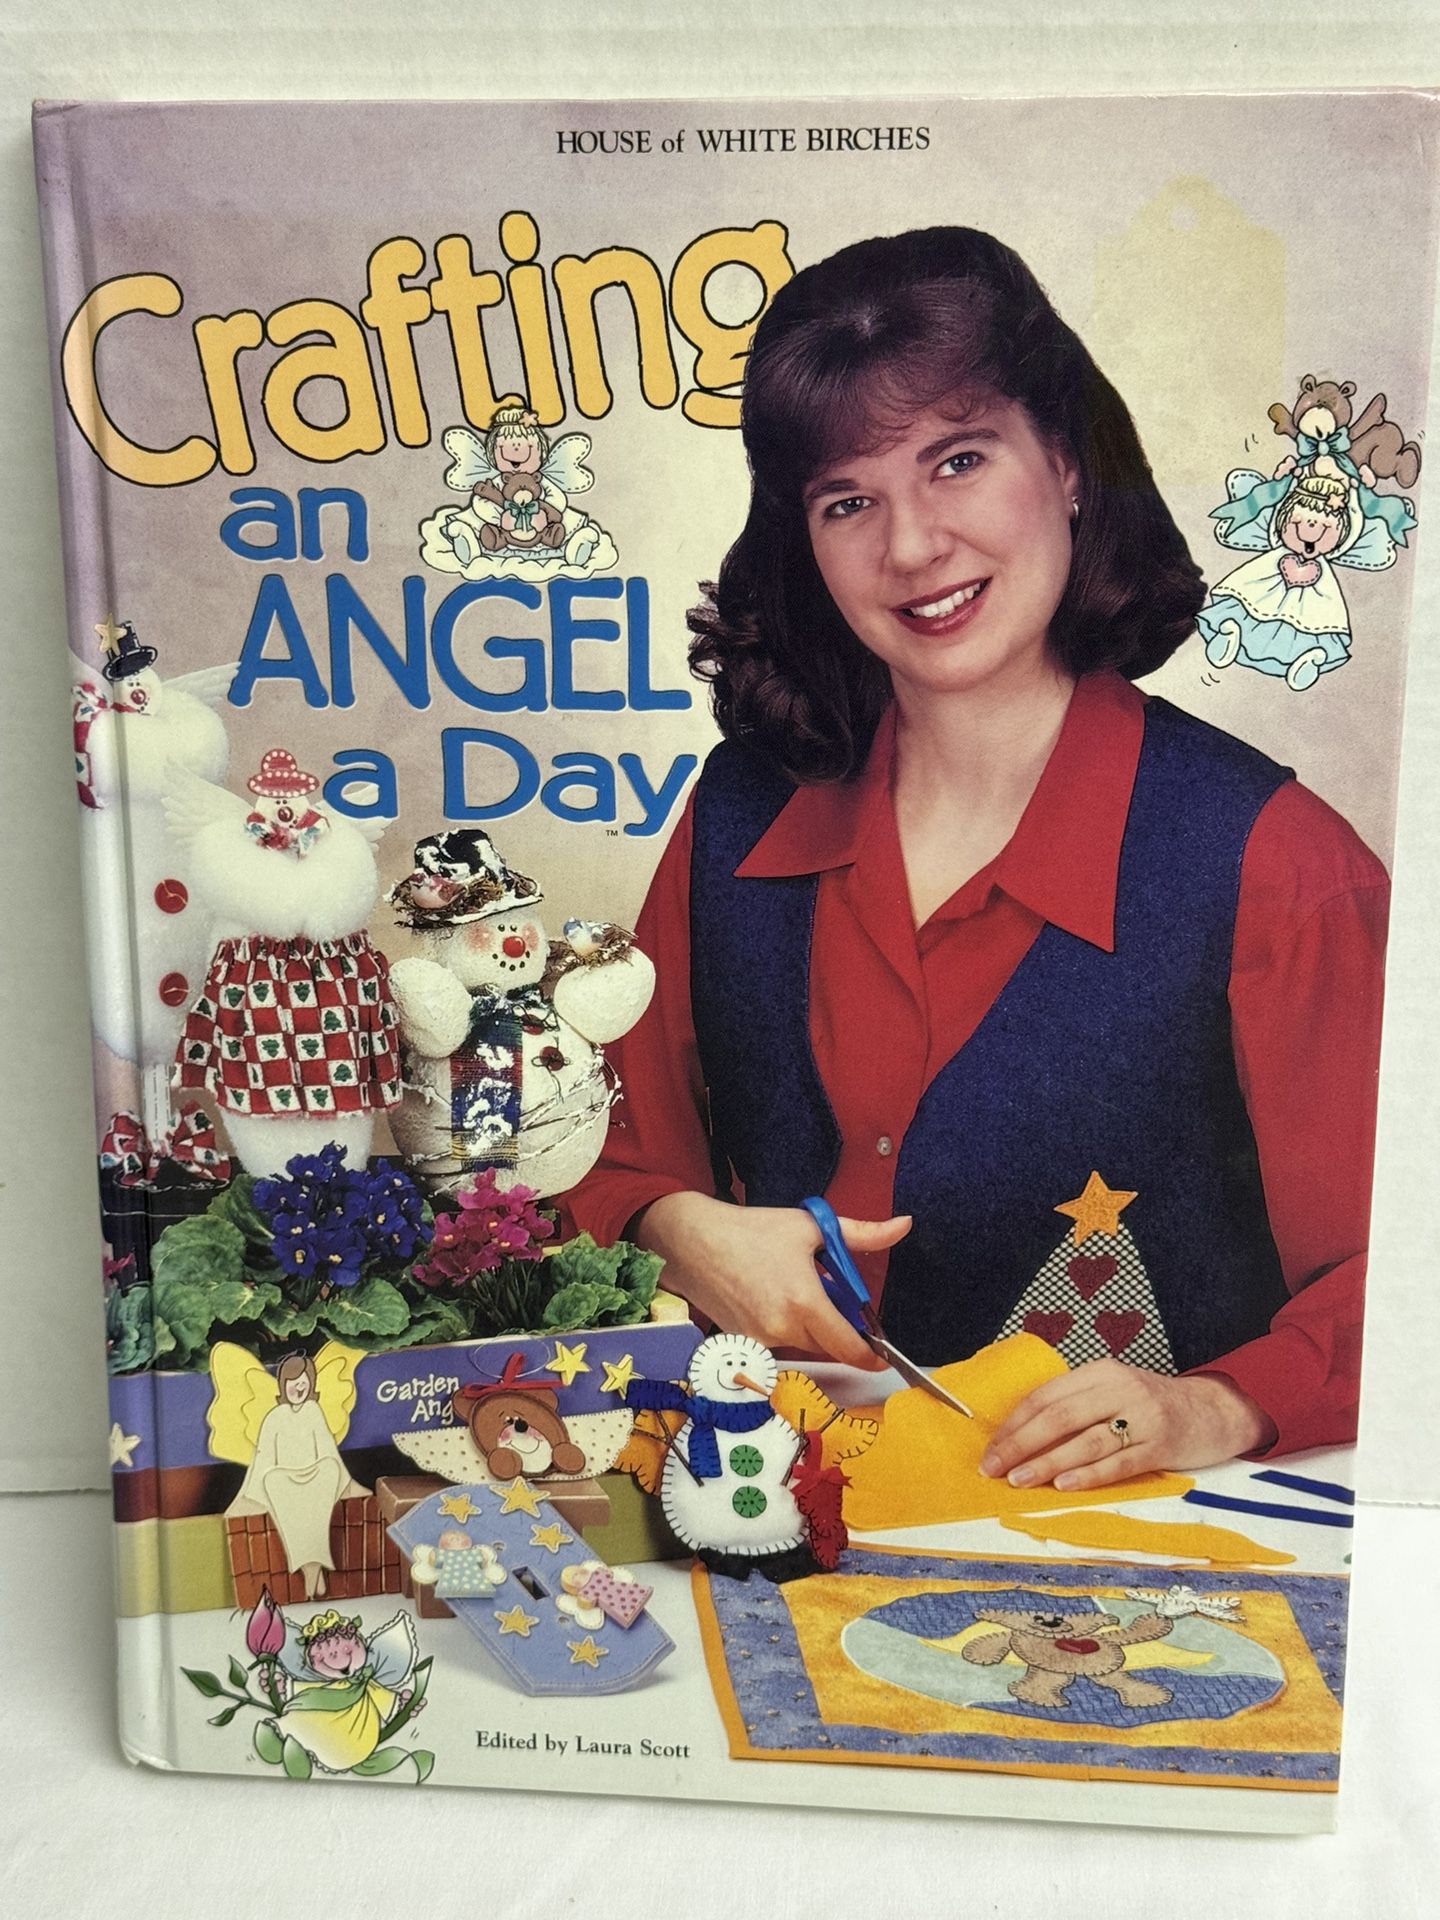 Book: House of White Birches - Crafting an Angel a Day Craft book.